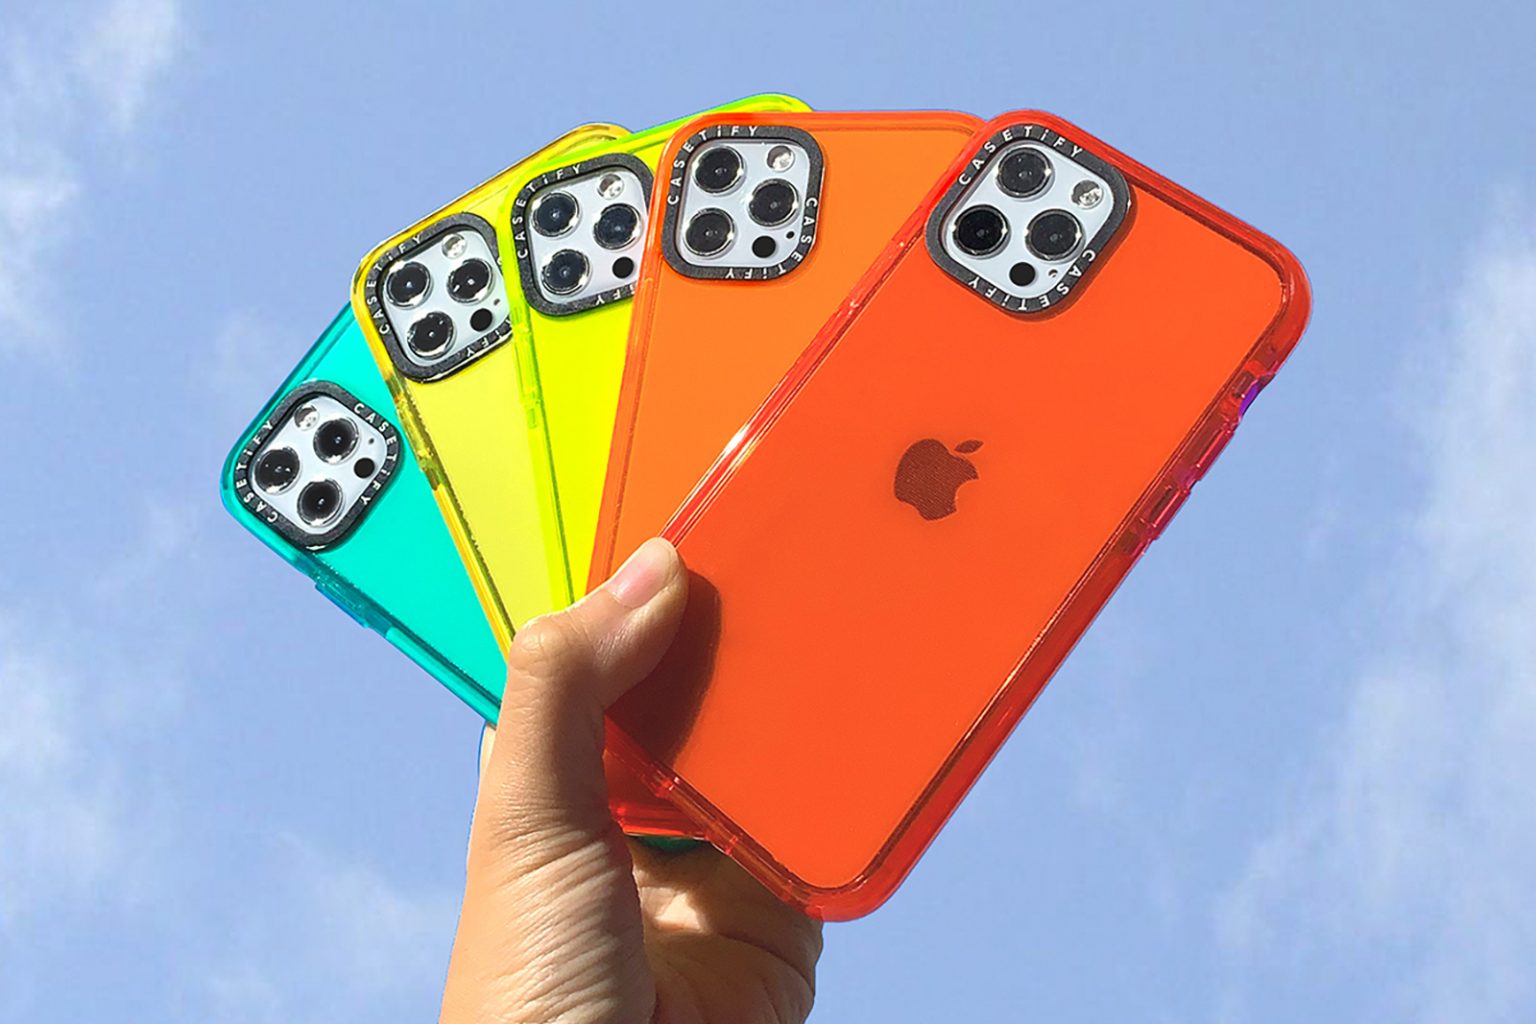 Colorful iPhone cases: The Casetify Color Pop collection comes in vibrant colors.